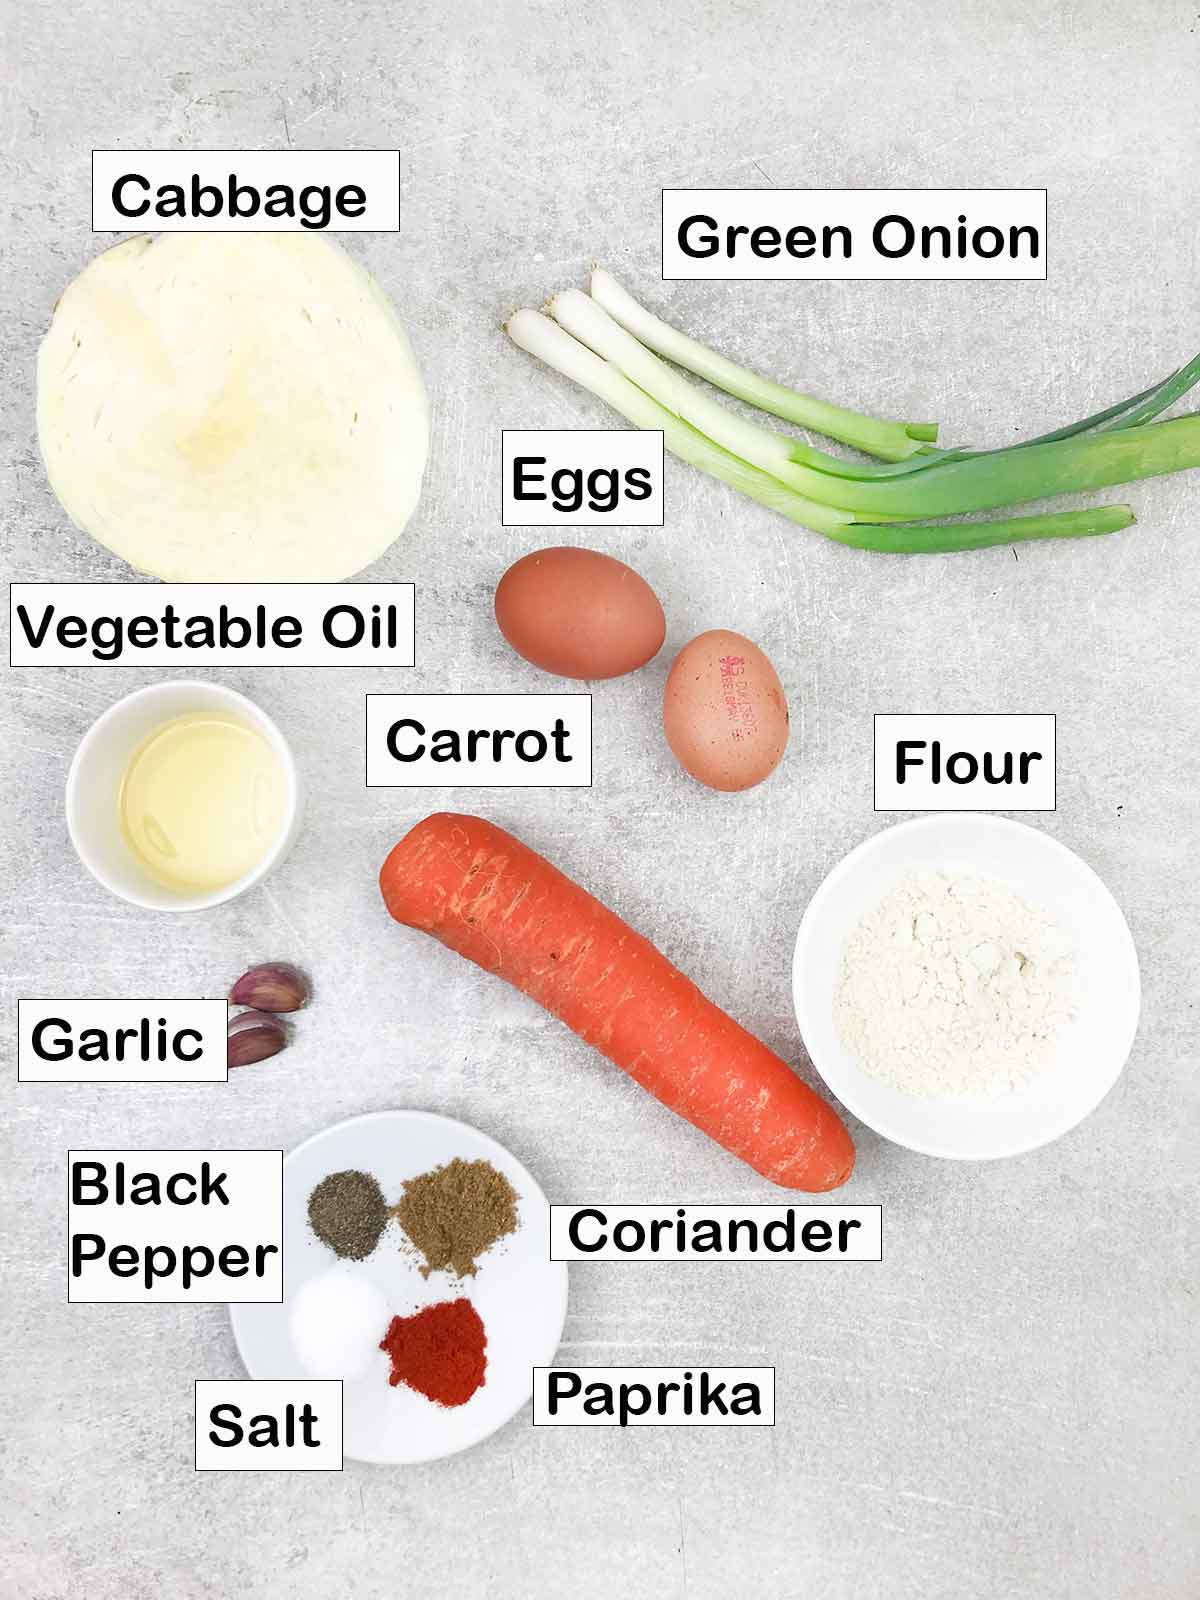 Labeled ingredients on the table.